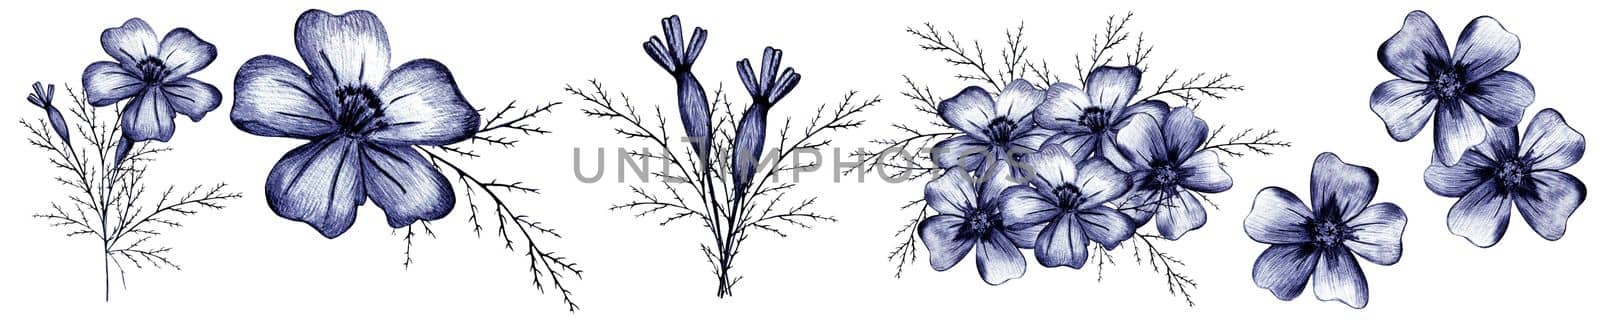 Set of Blue Hand Drawn Marigold Flower Isolated on White Background. Marigold Flower Collection Drawn by Pencil.